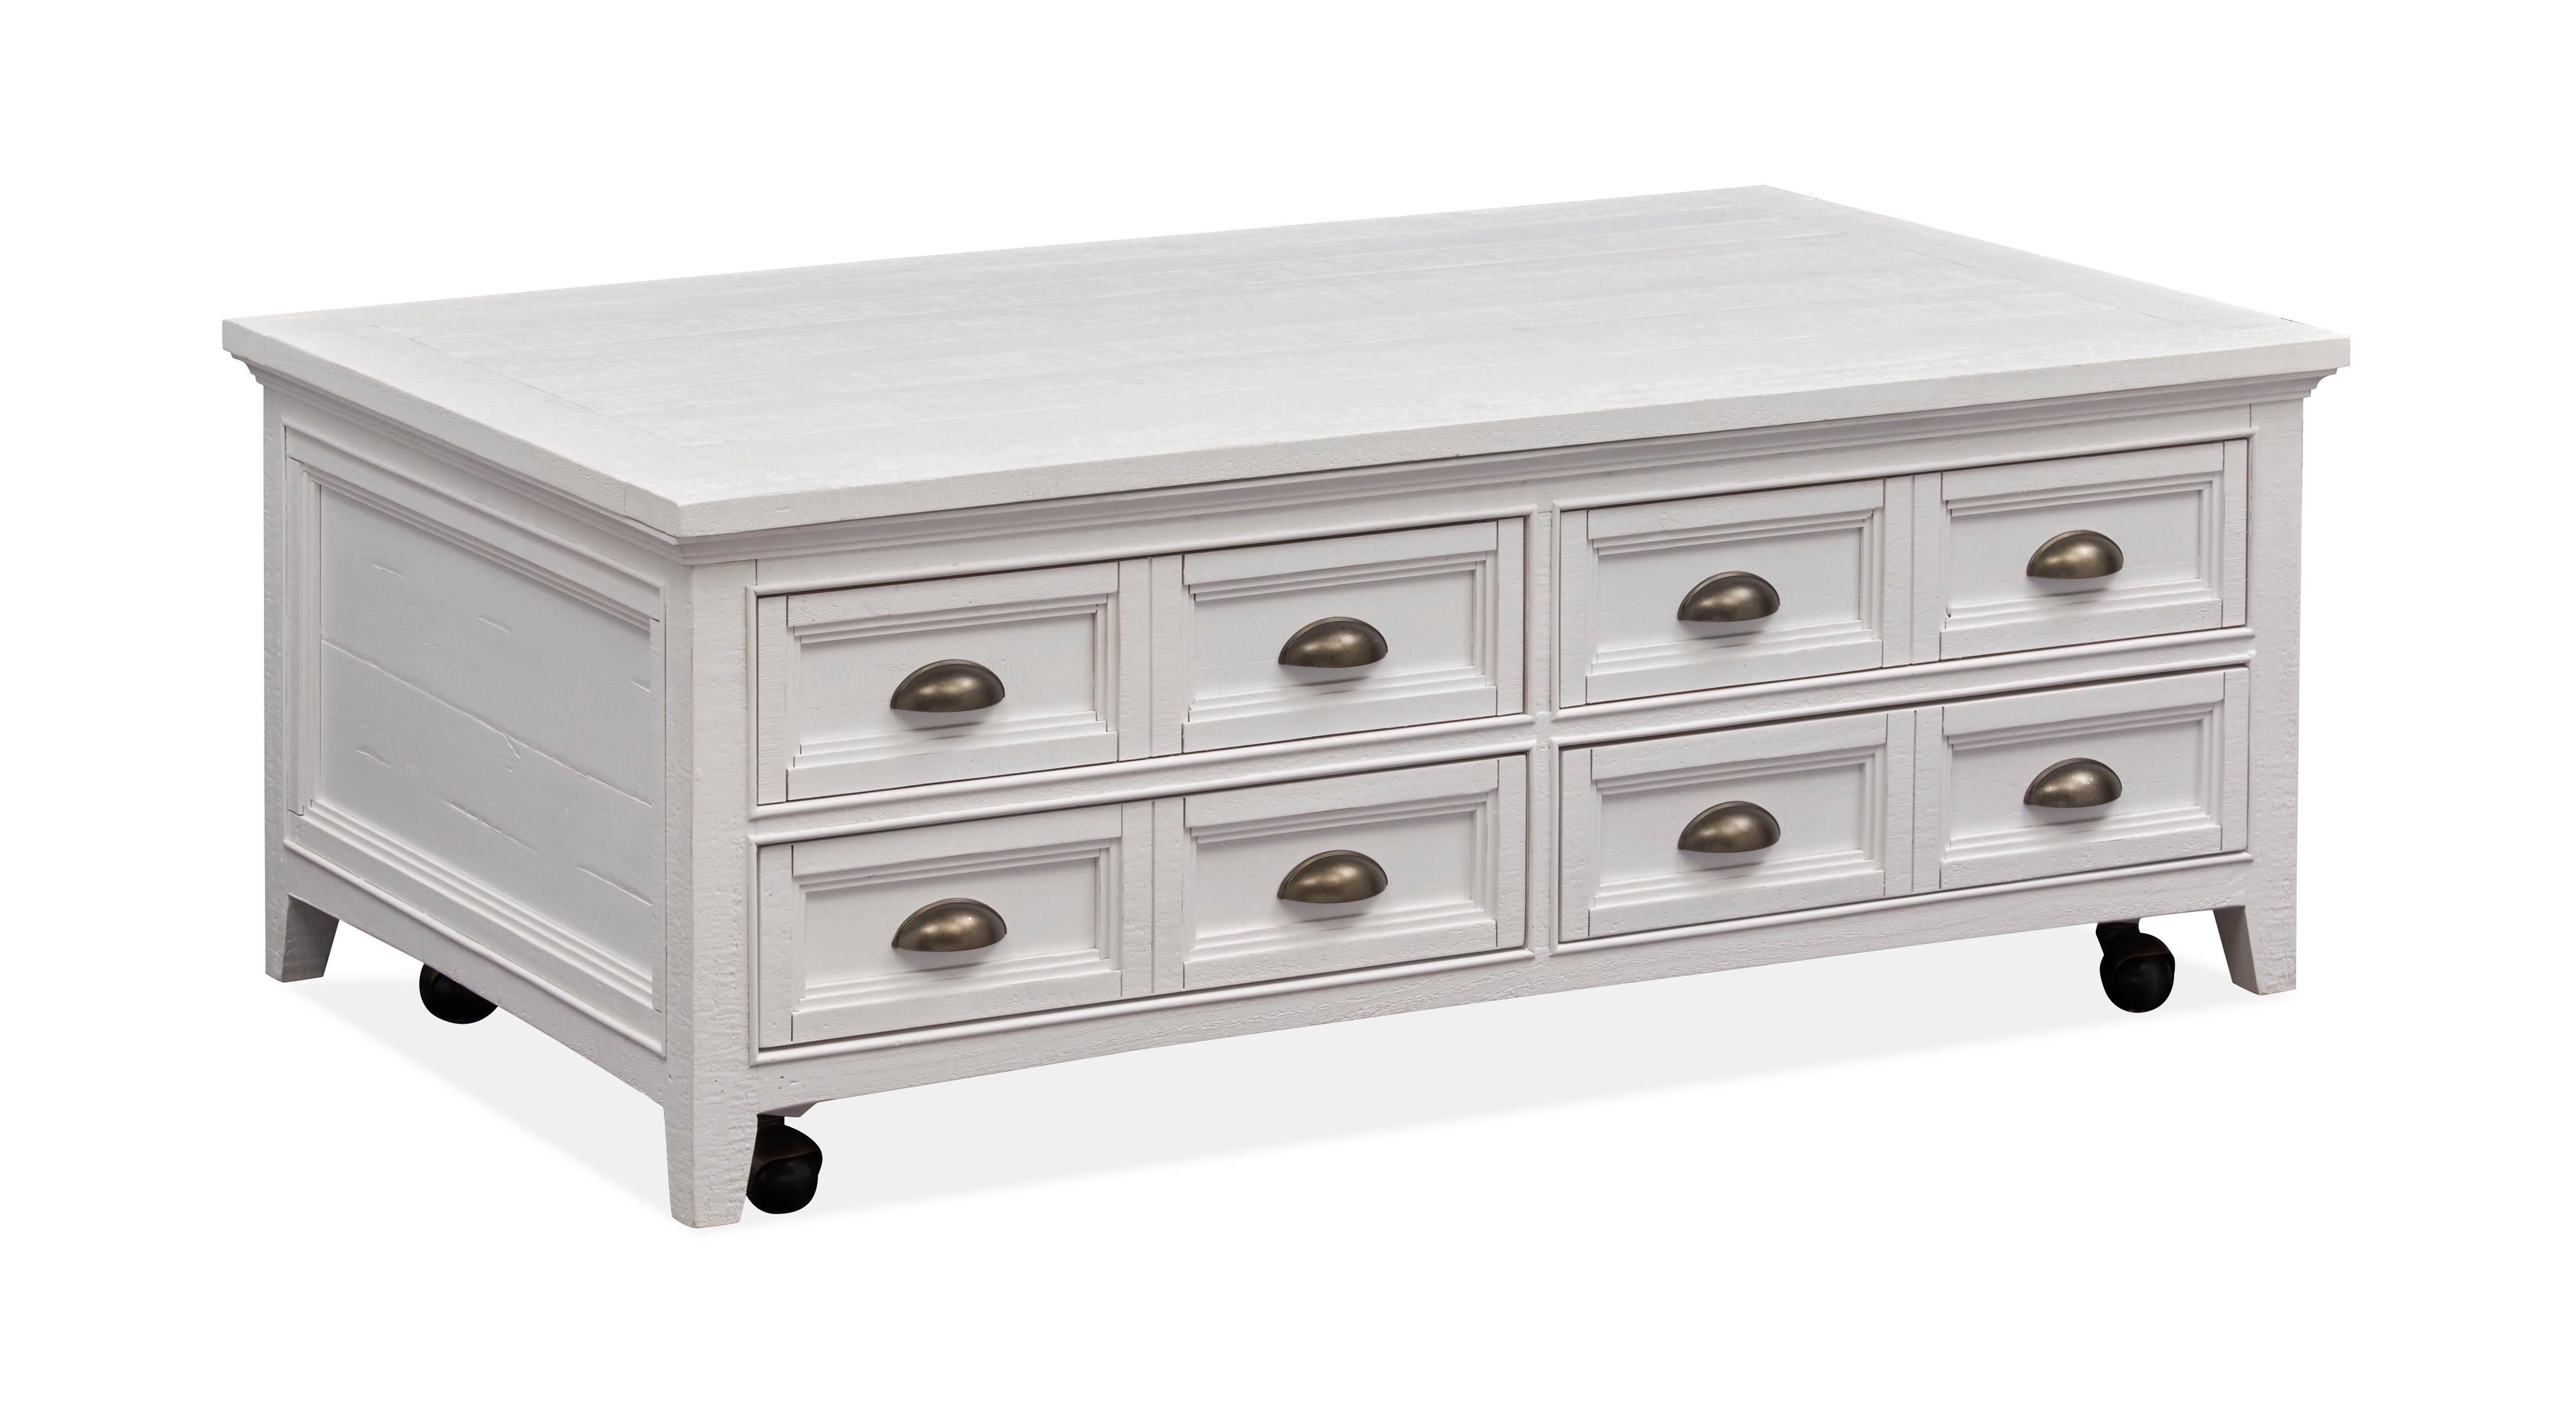 Heron Cove - Lift Top Storage Cocktail Table With Casters - Chalk White